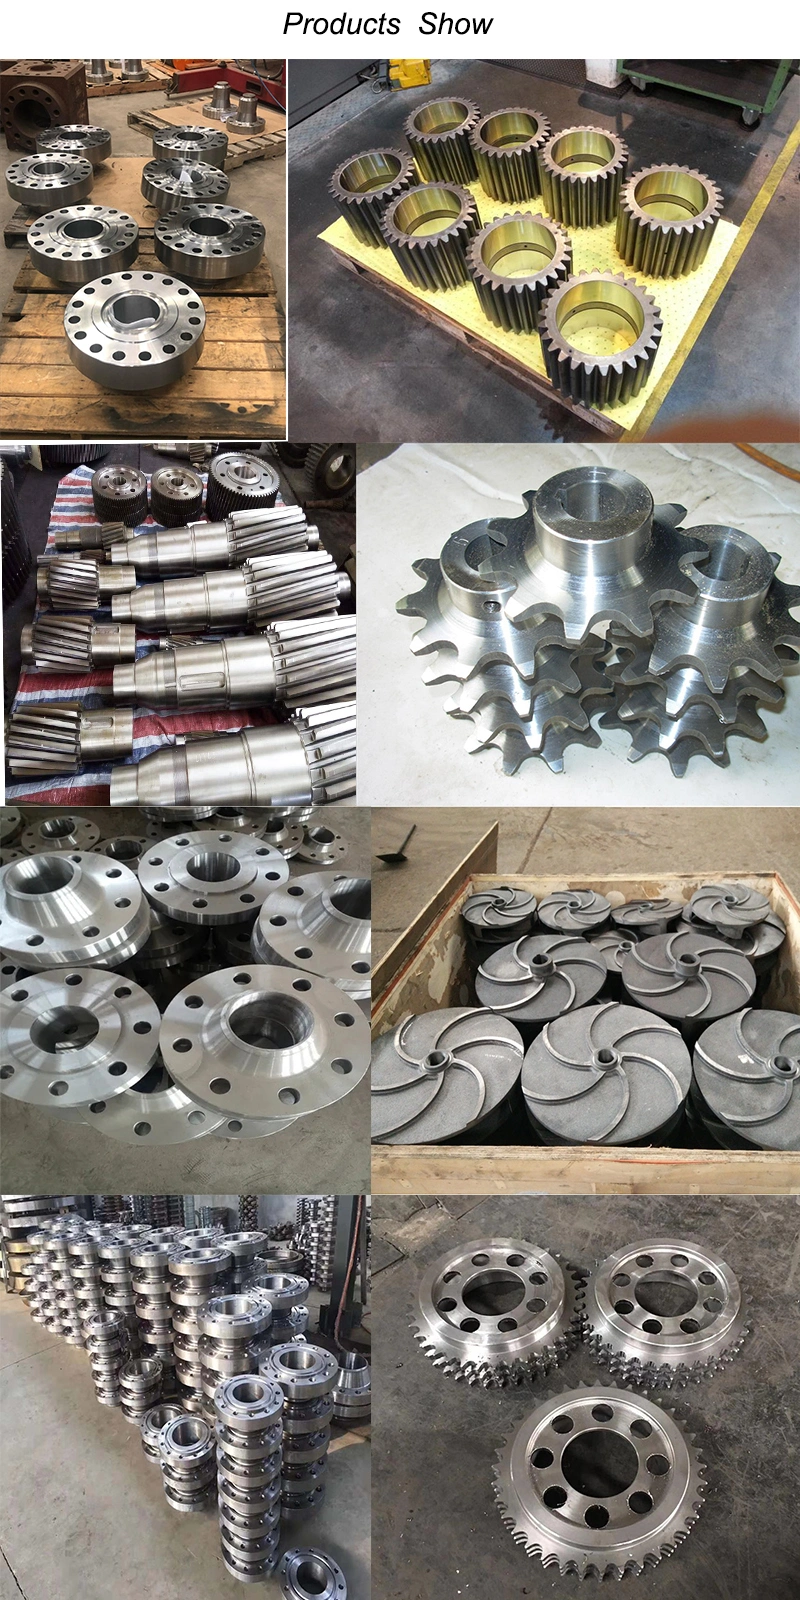 OEM Foundry Aluminum Alloy Metal Die Casting Shell with Mold/Molding Manufacturing Process